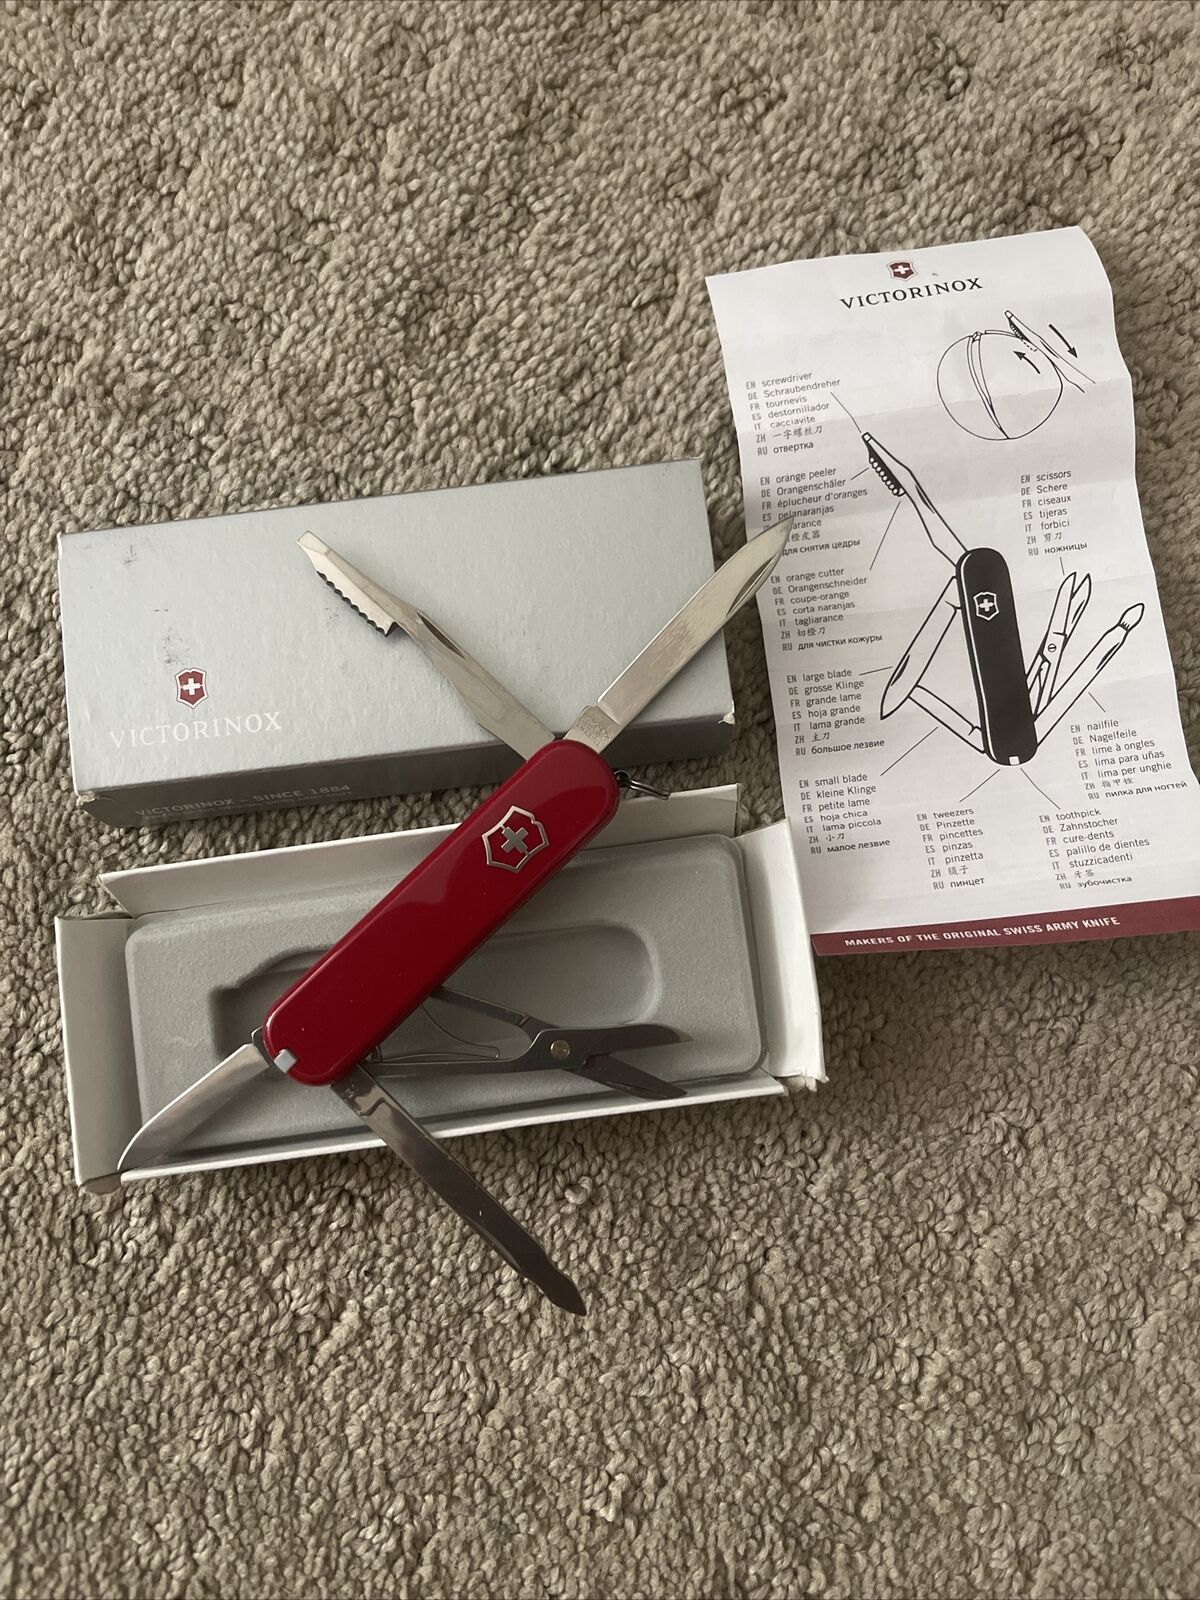 Victorinox Executive Discontinued 74mm Swiss Army Knife New In Box Rare 0.6603